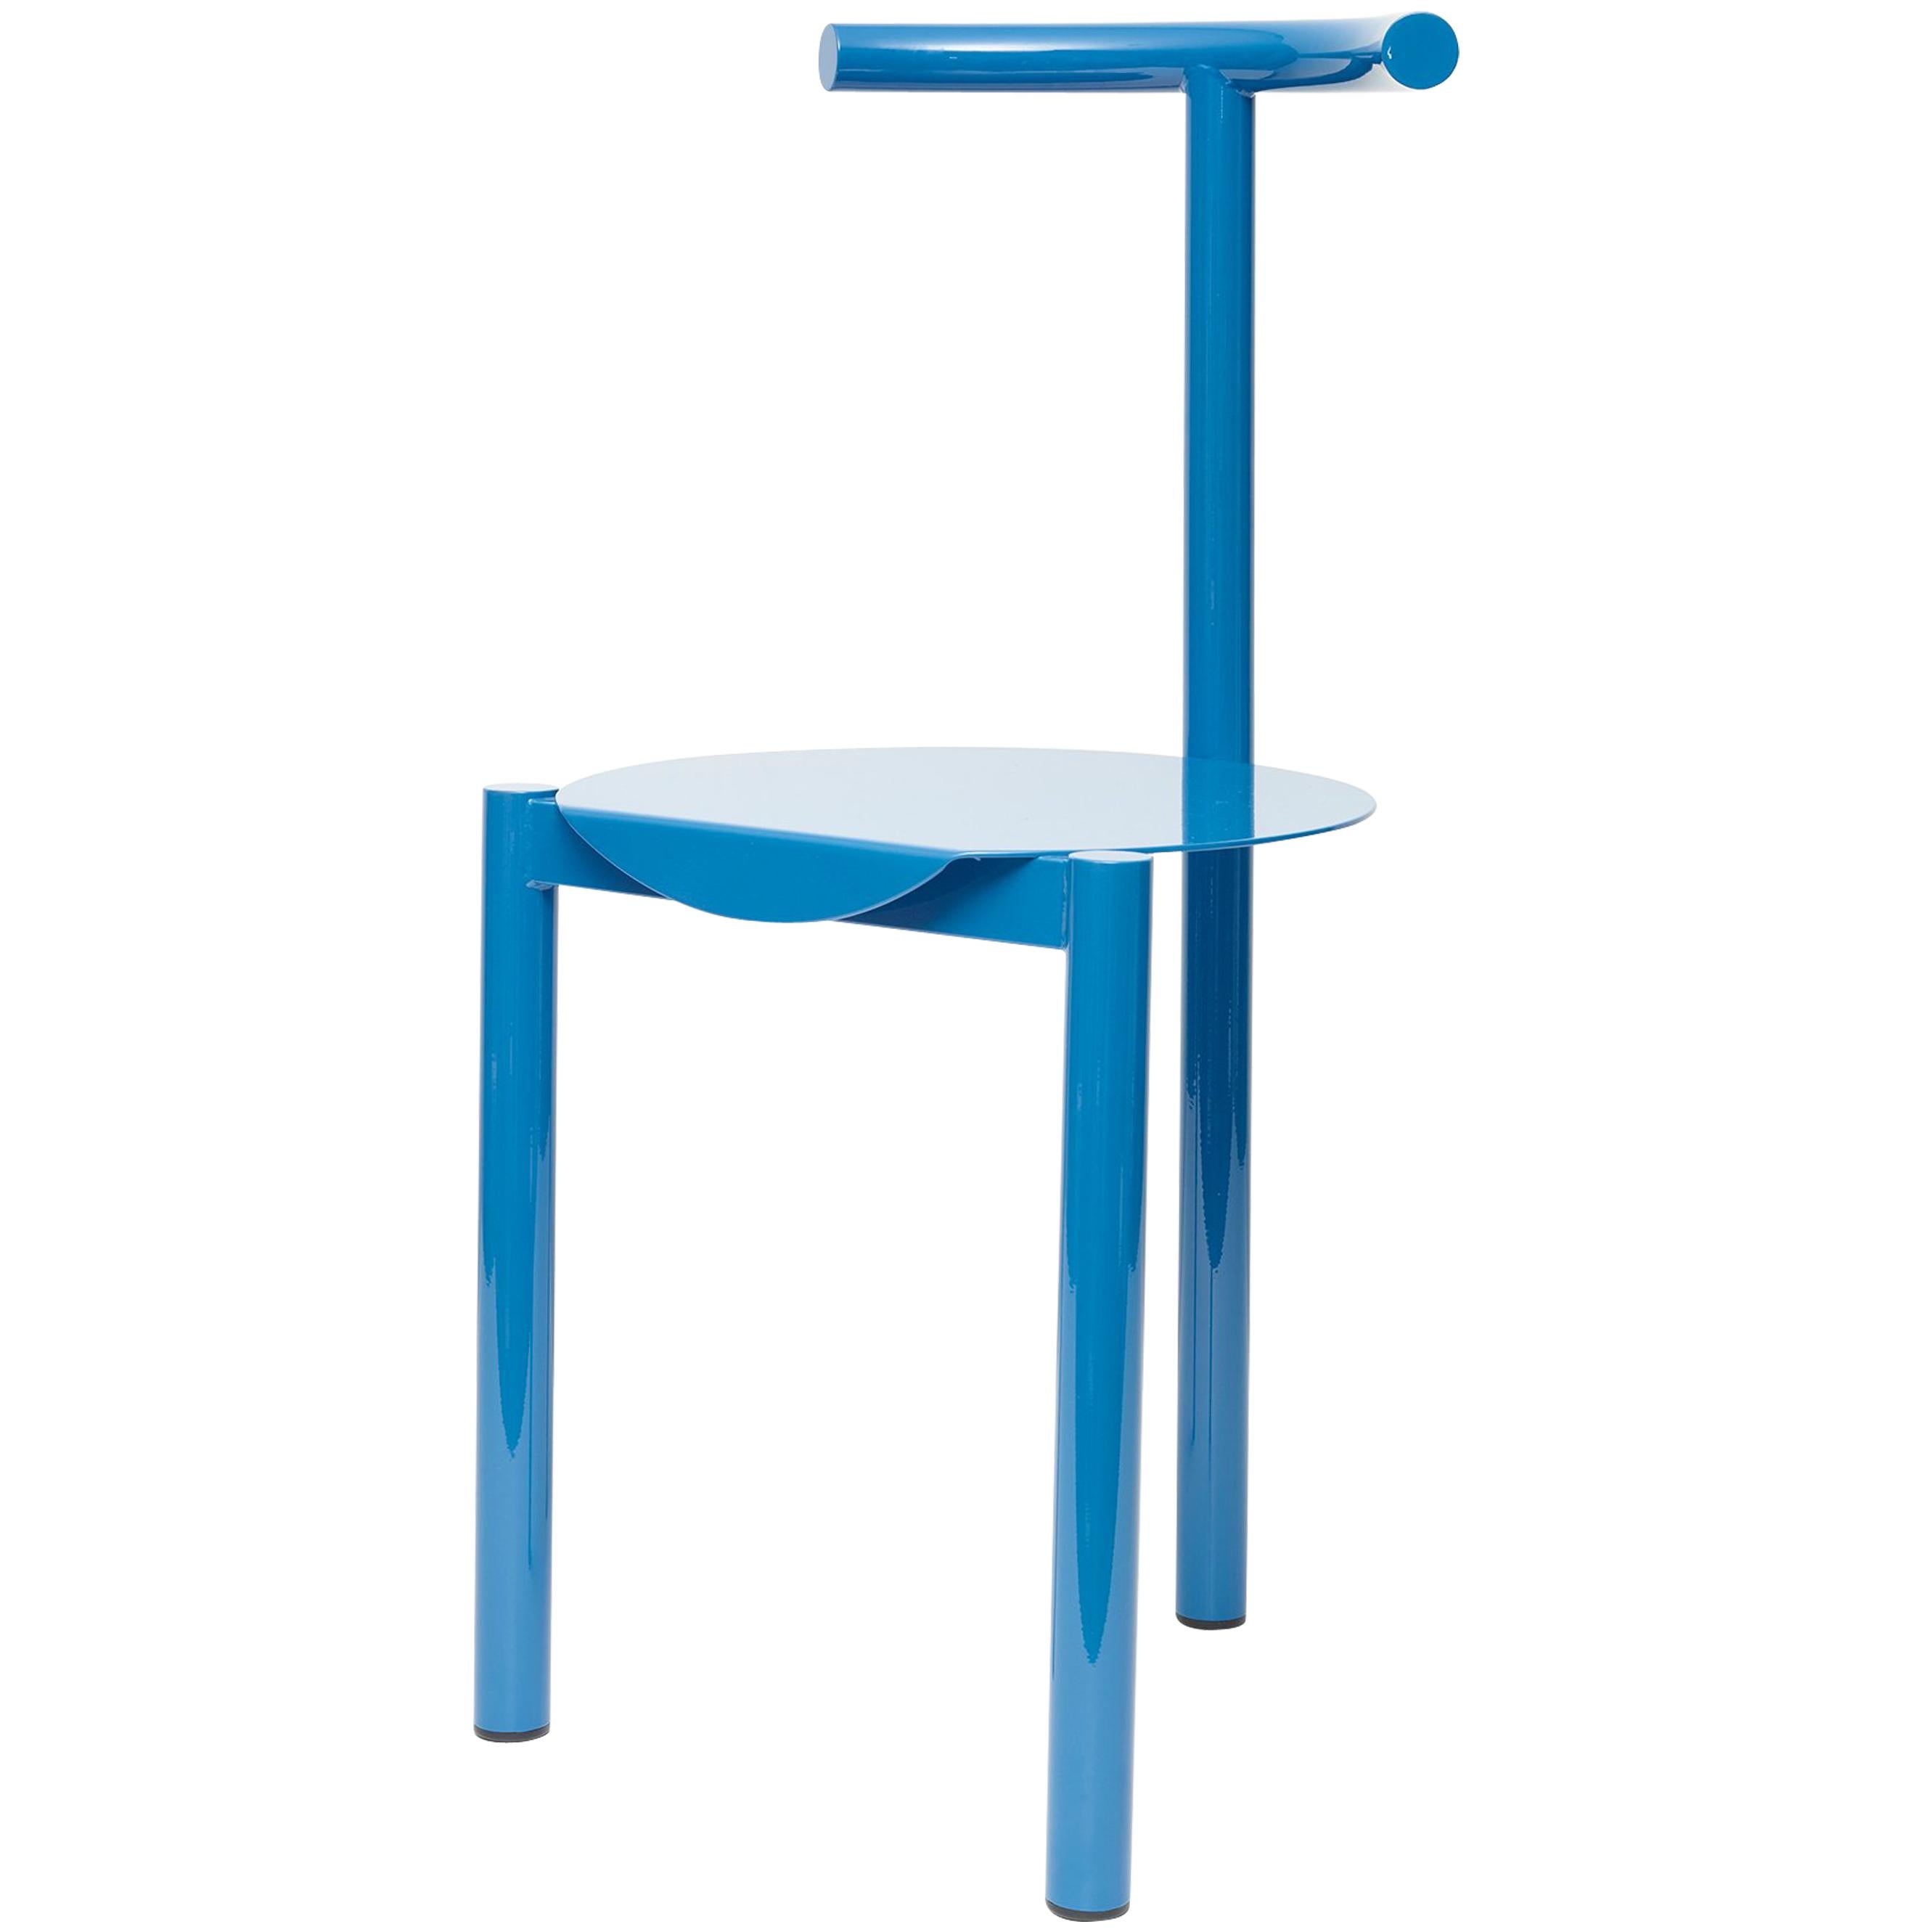 B Series Chair - Contemporary, Minimal, Powder-Coated Steel Metal For Sale